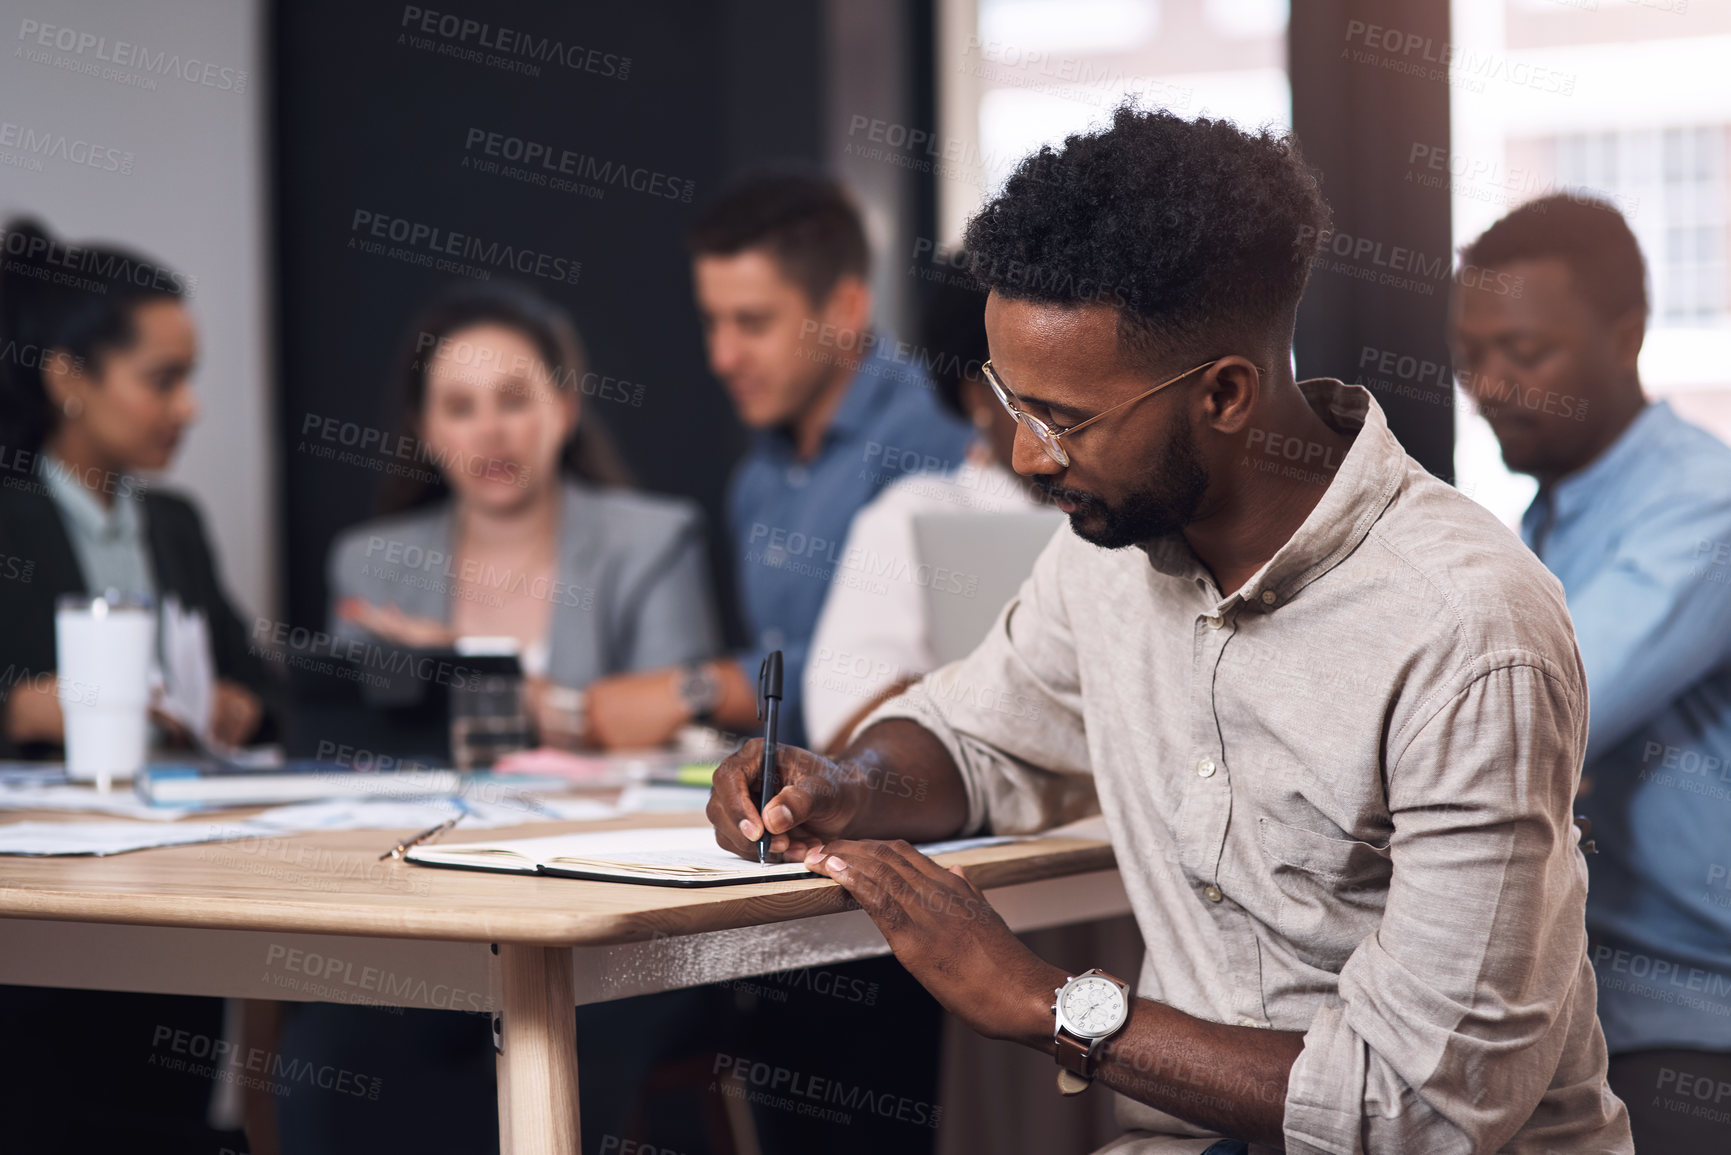 Buy stock photo Shot of a young businessman writing in a notebook while sitting in an office with his colleagues in the background